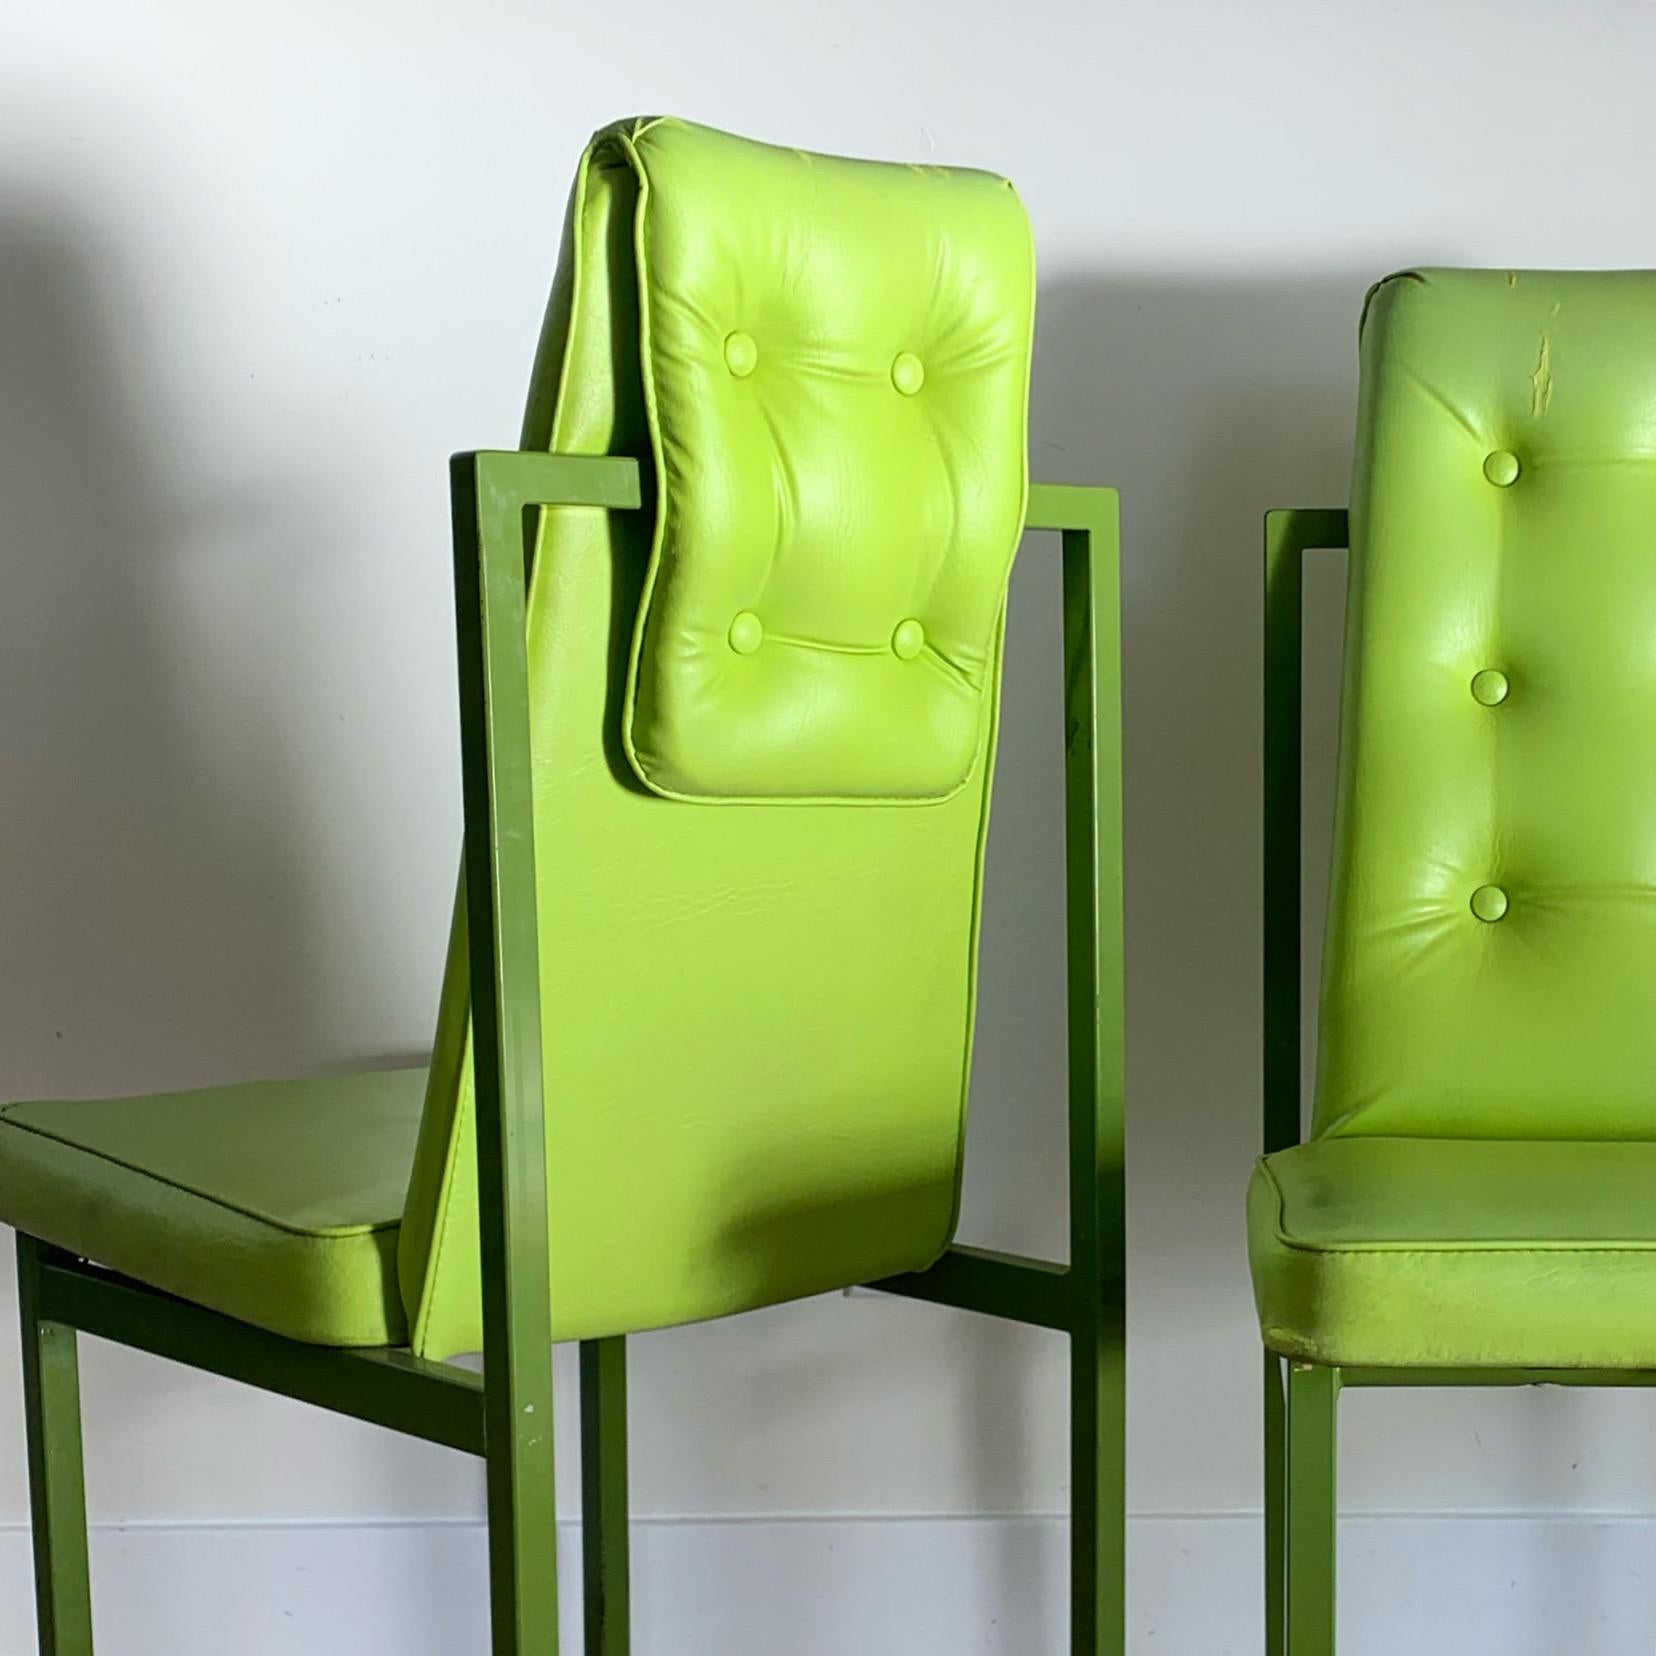 A pair of structural mid century Cal-Style chairs with powder coated grass-green frames and chartreuse leather upholstery. Circa mid 70s. Signs of wear (repaired upholstery in both tops, as well as minor wear to frames) but overall good vintage